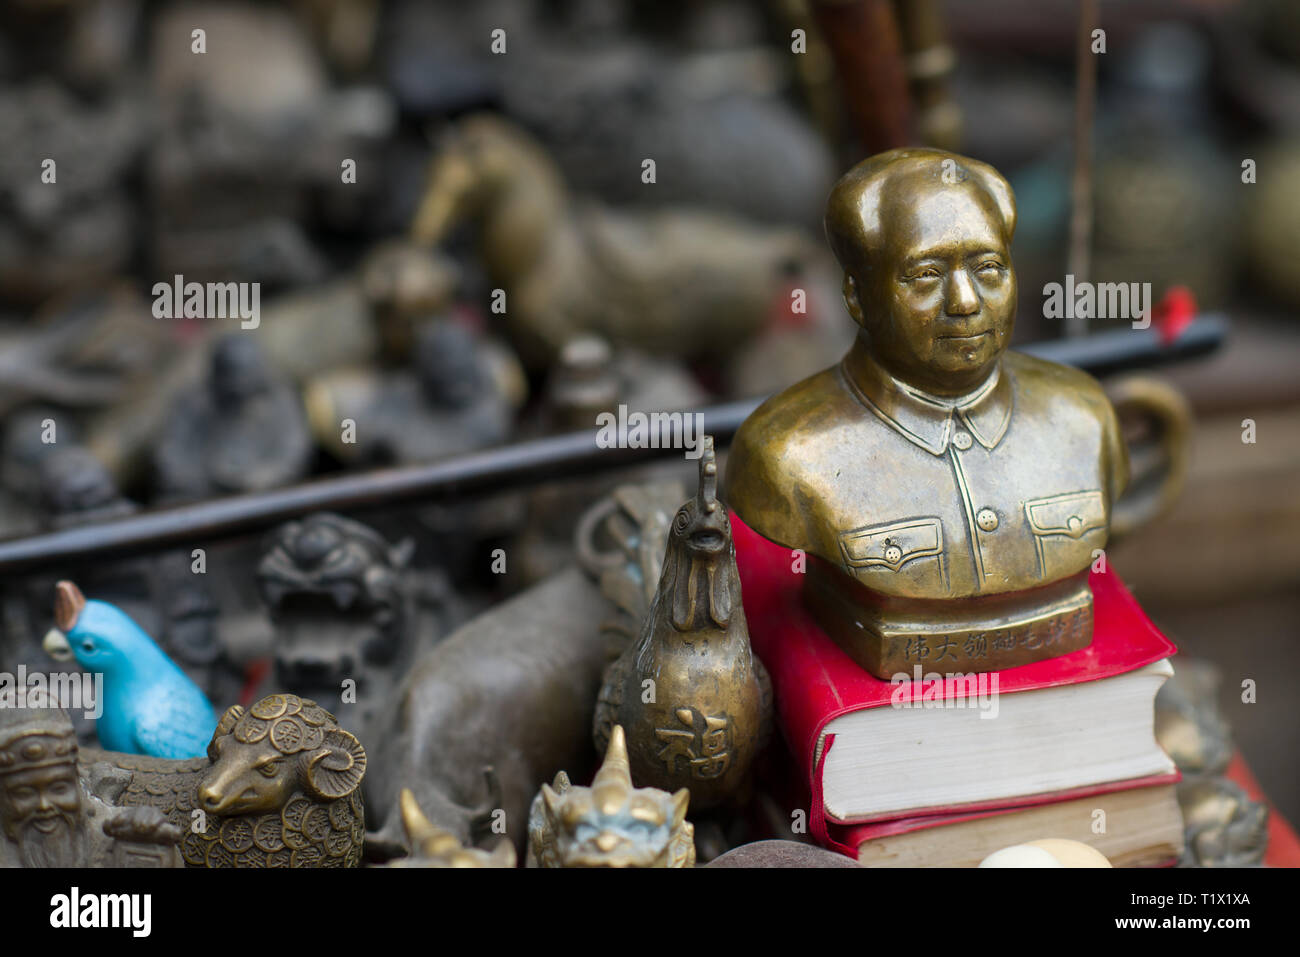 Pingyao, China - 08 13 2016: Vintage and old Chinese Bronze Great Leader Mao Zedong Bust Head small statue in a street market in Pingyao, China Stock Photo